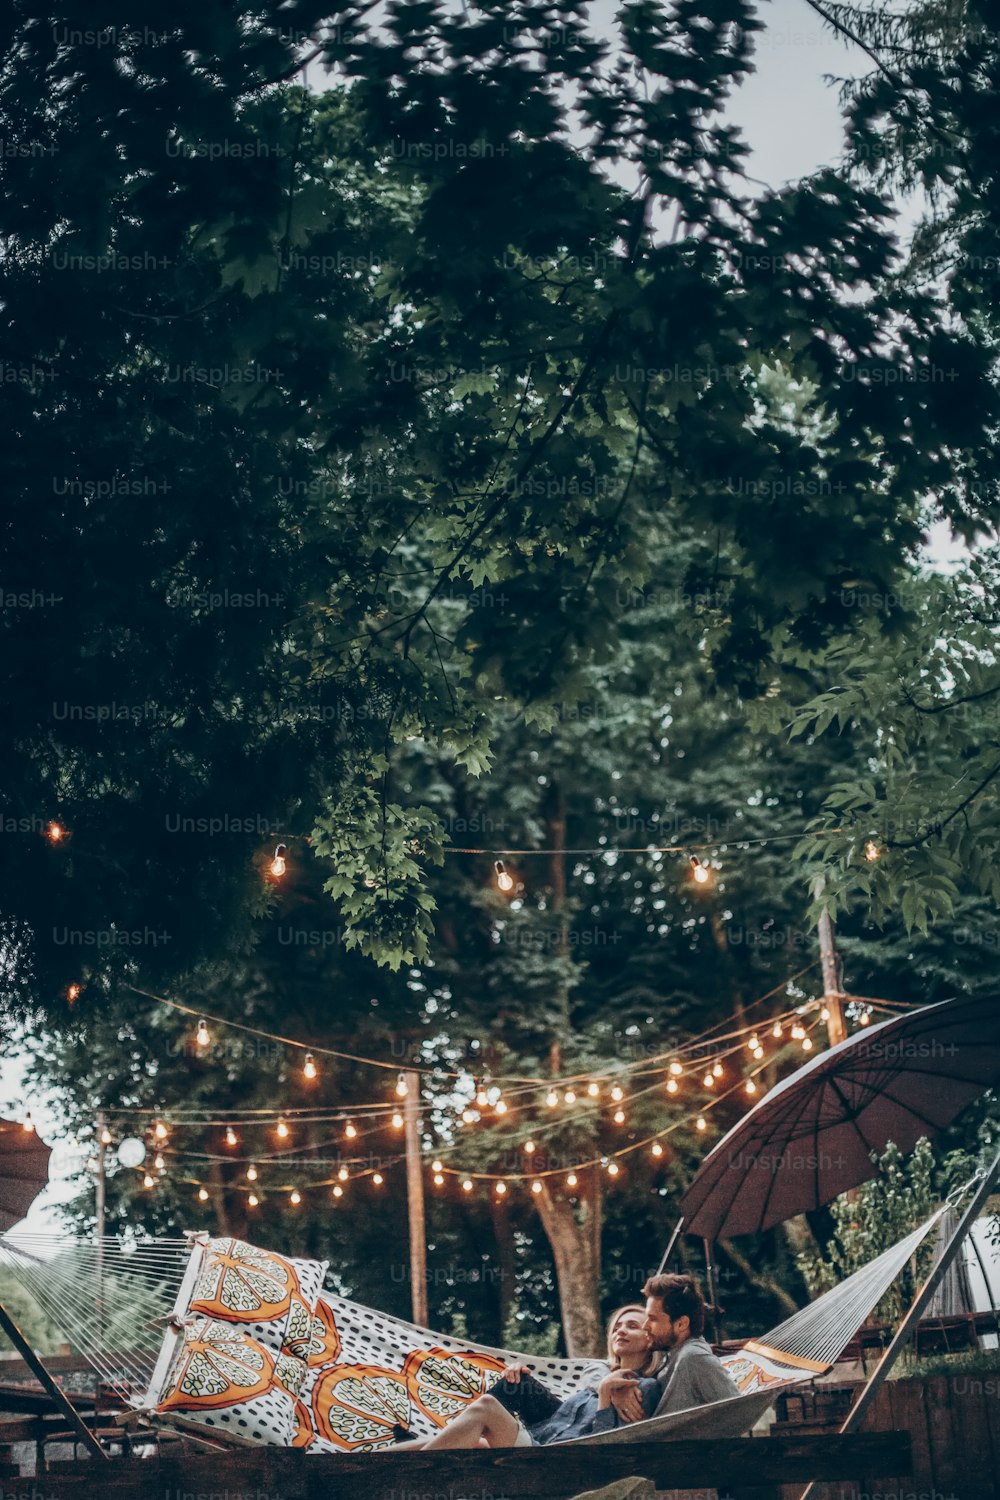 stylish hipster family couple cuddling and relaxing in hammock under retro lights in evening summer park. rustic man and woman embracing and resting in forest. space for text. atmospheric moment